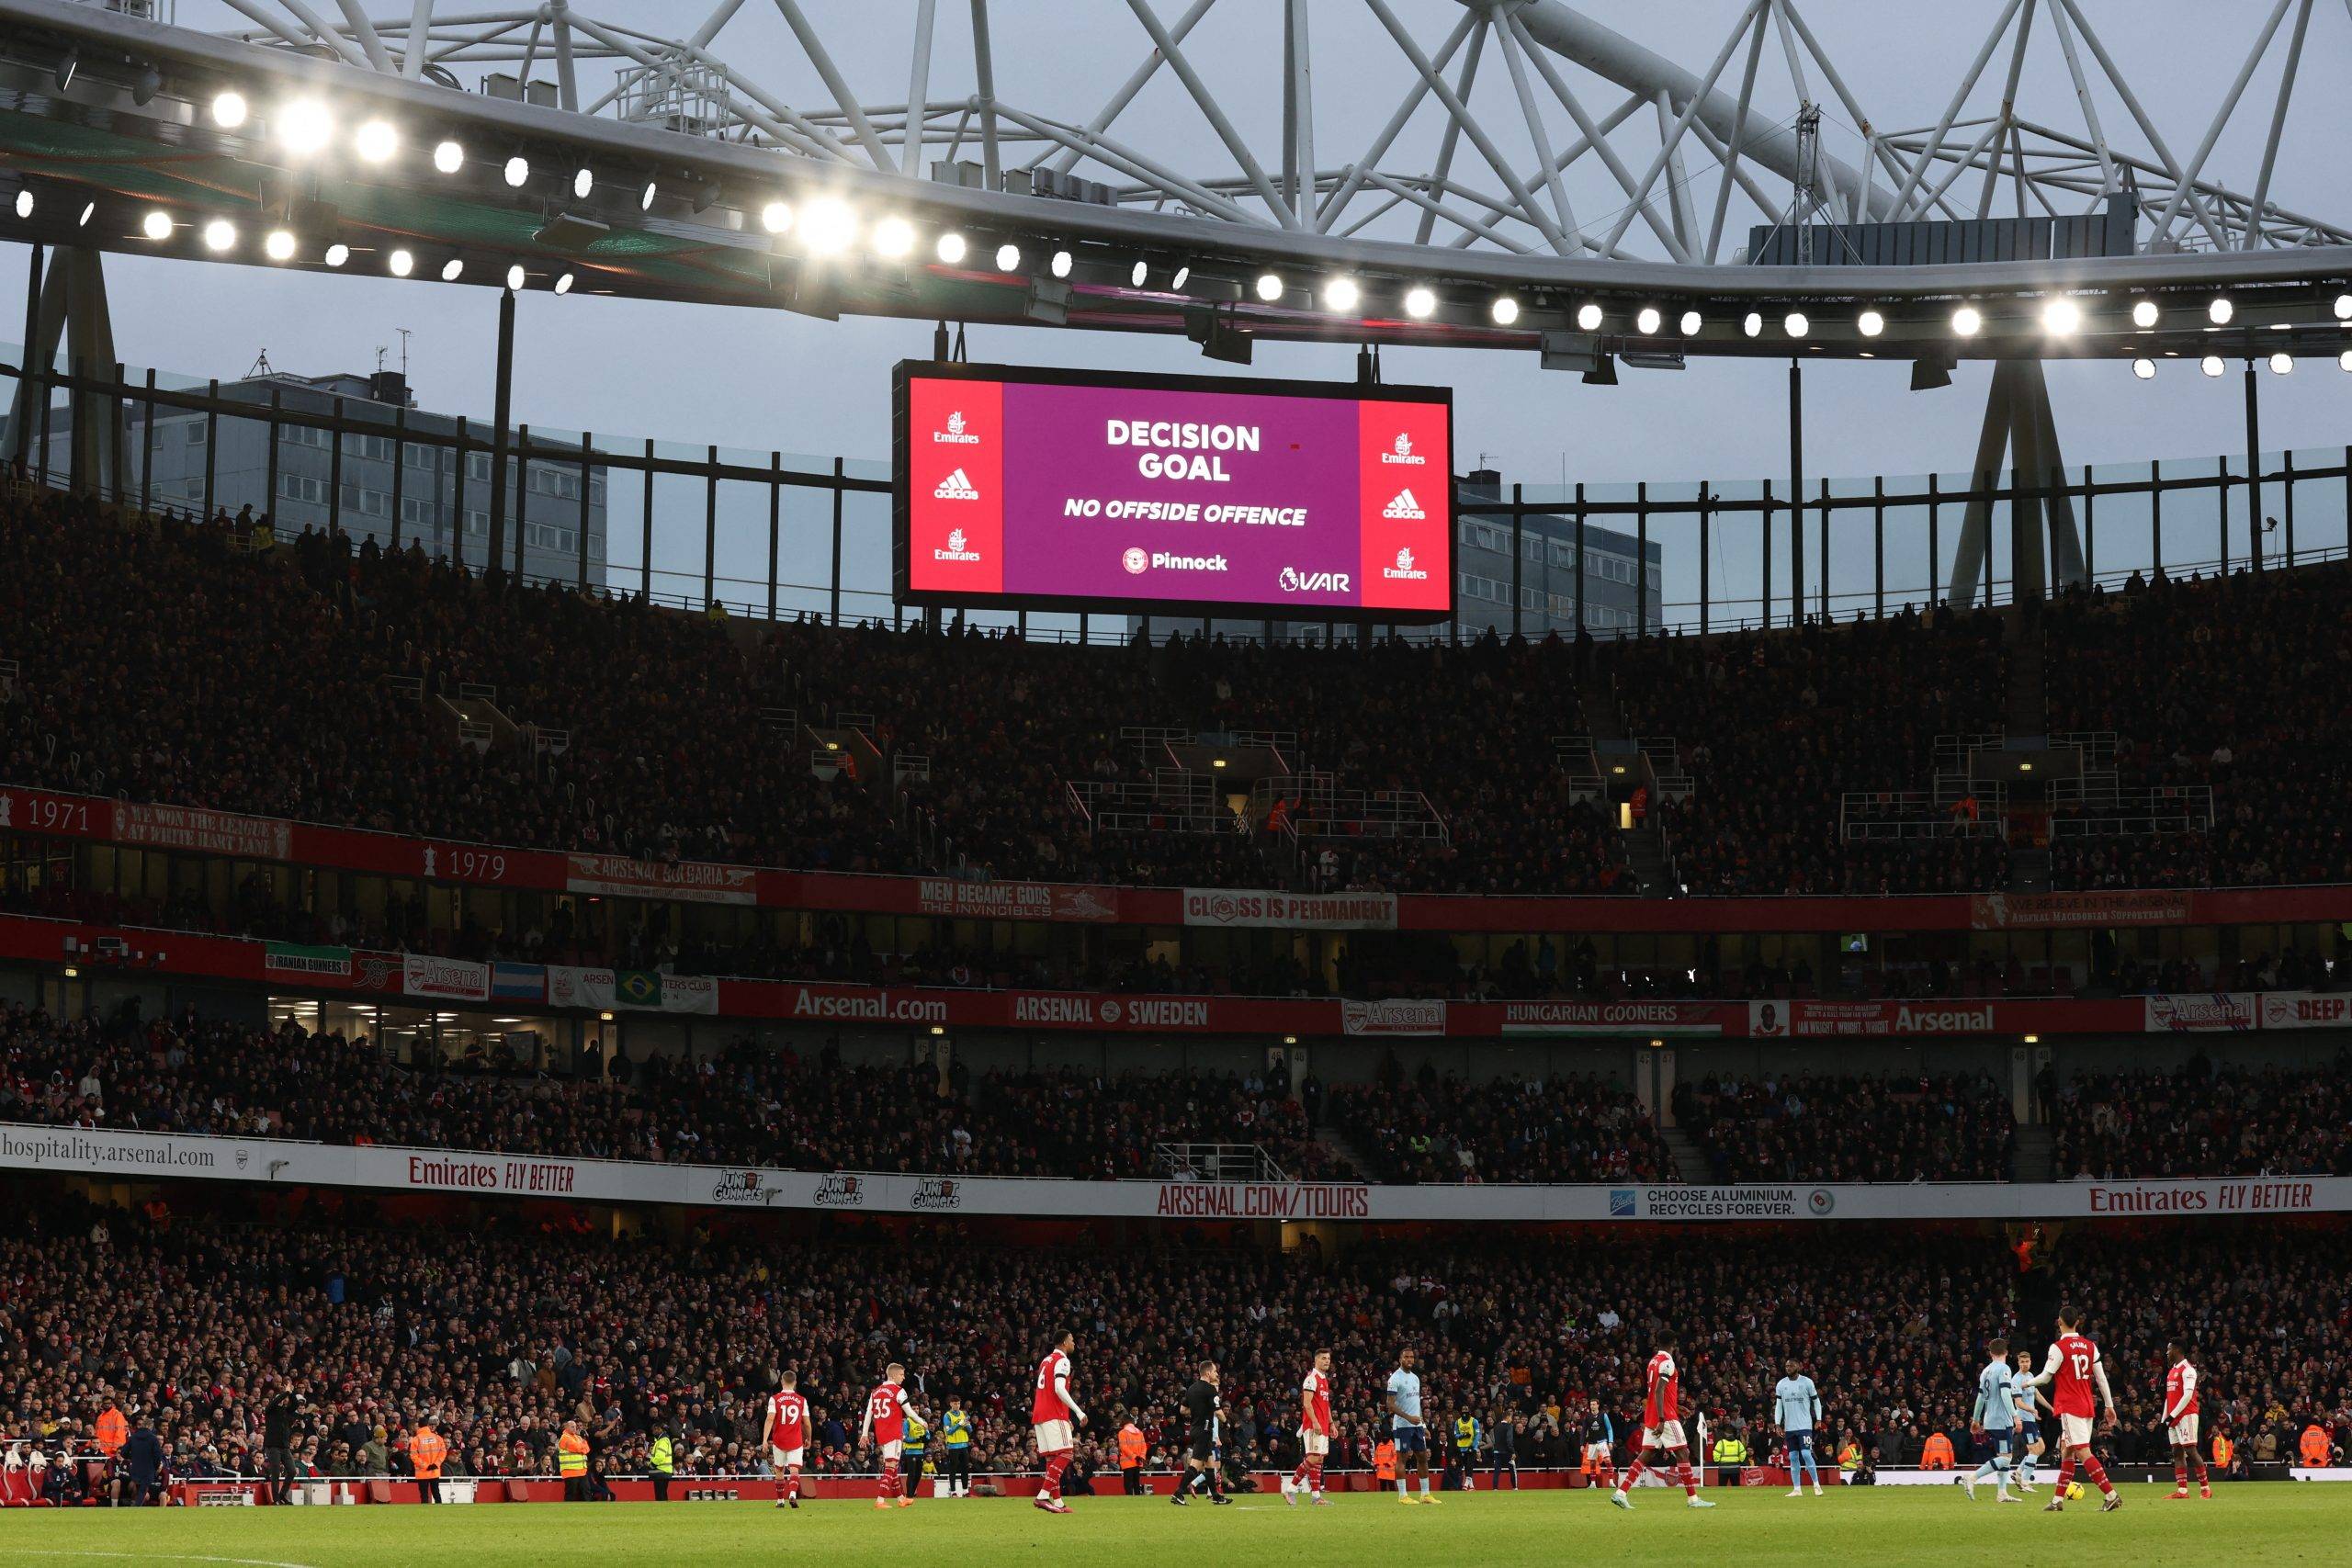 Arsenal: Brentford goal should have been disallowed - Arsenal News